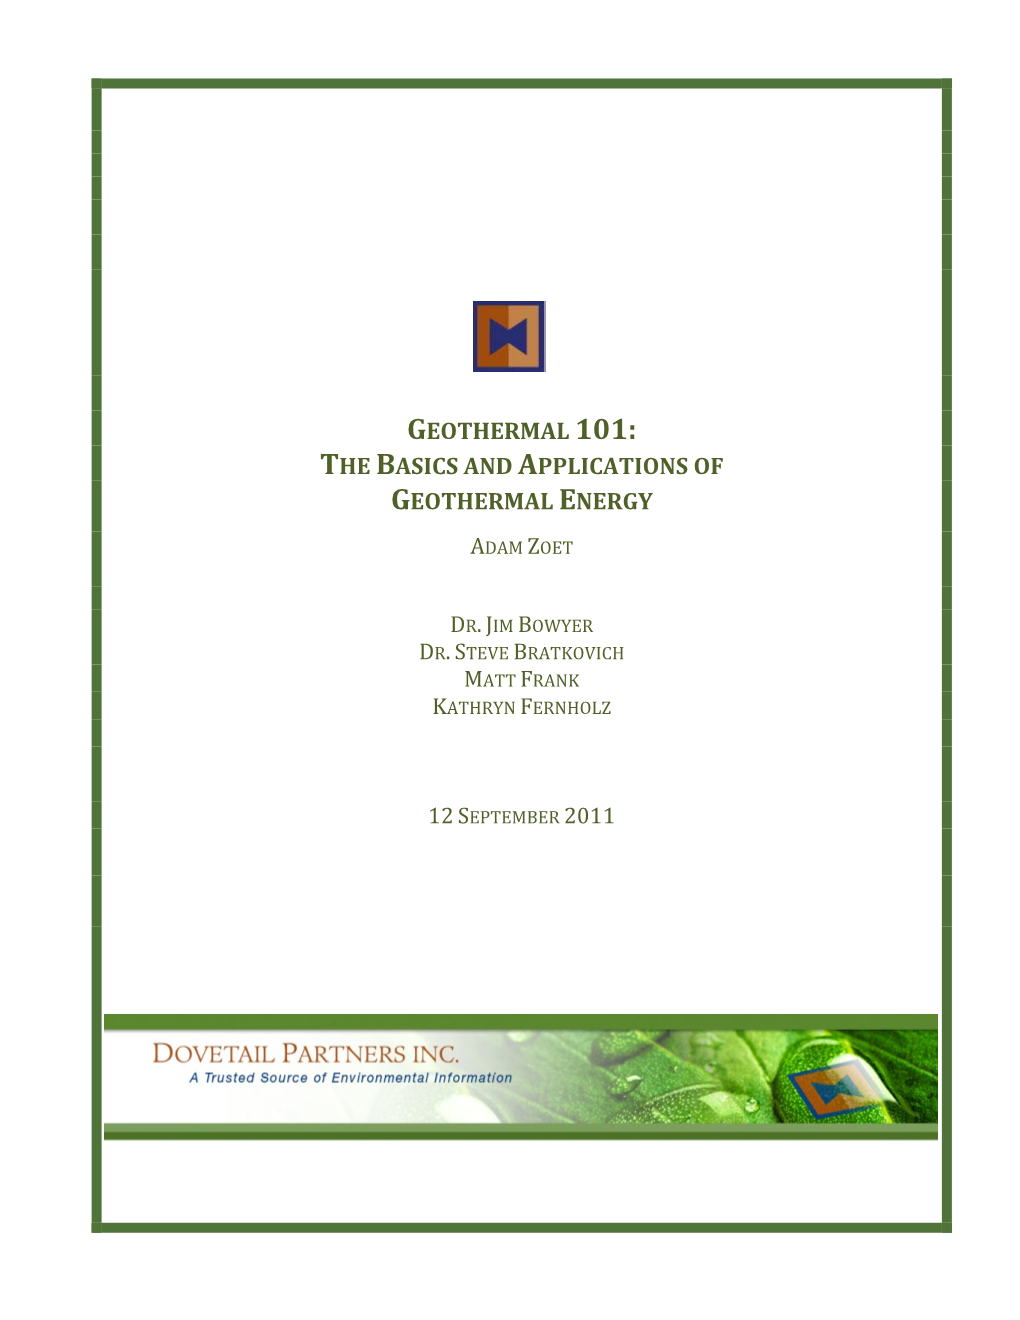 The Basics and Applications of Geothermal Energy